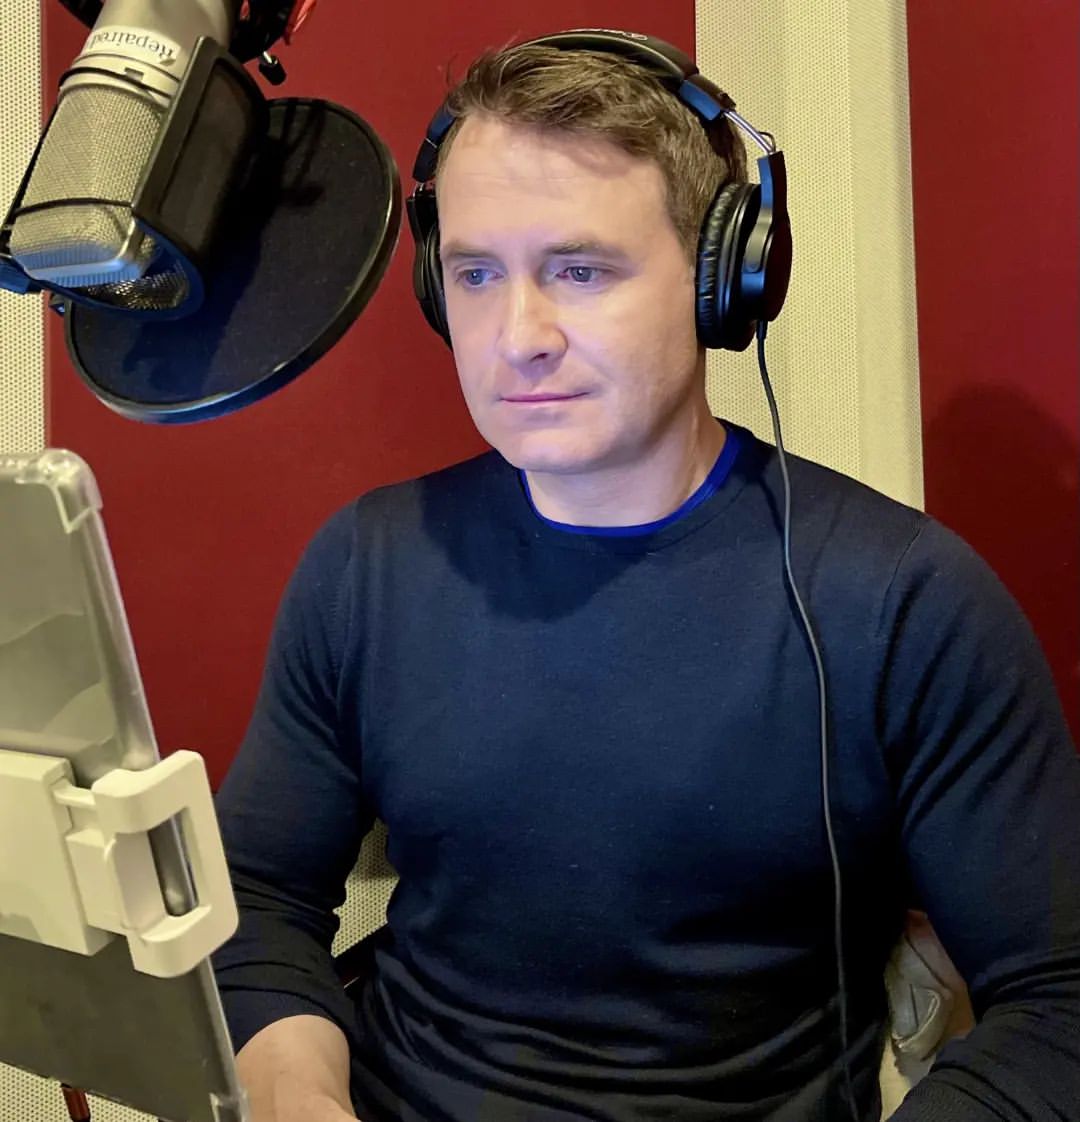 Douglas at the recording studio recording The War on the West on March 19, 2022